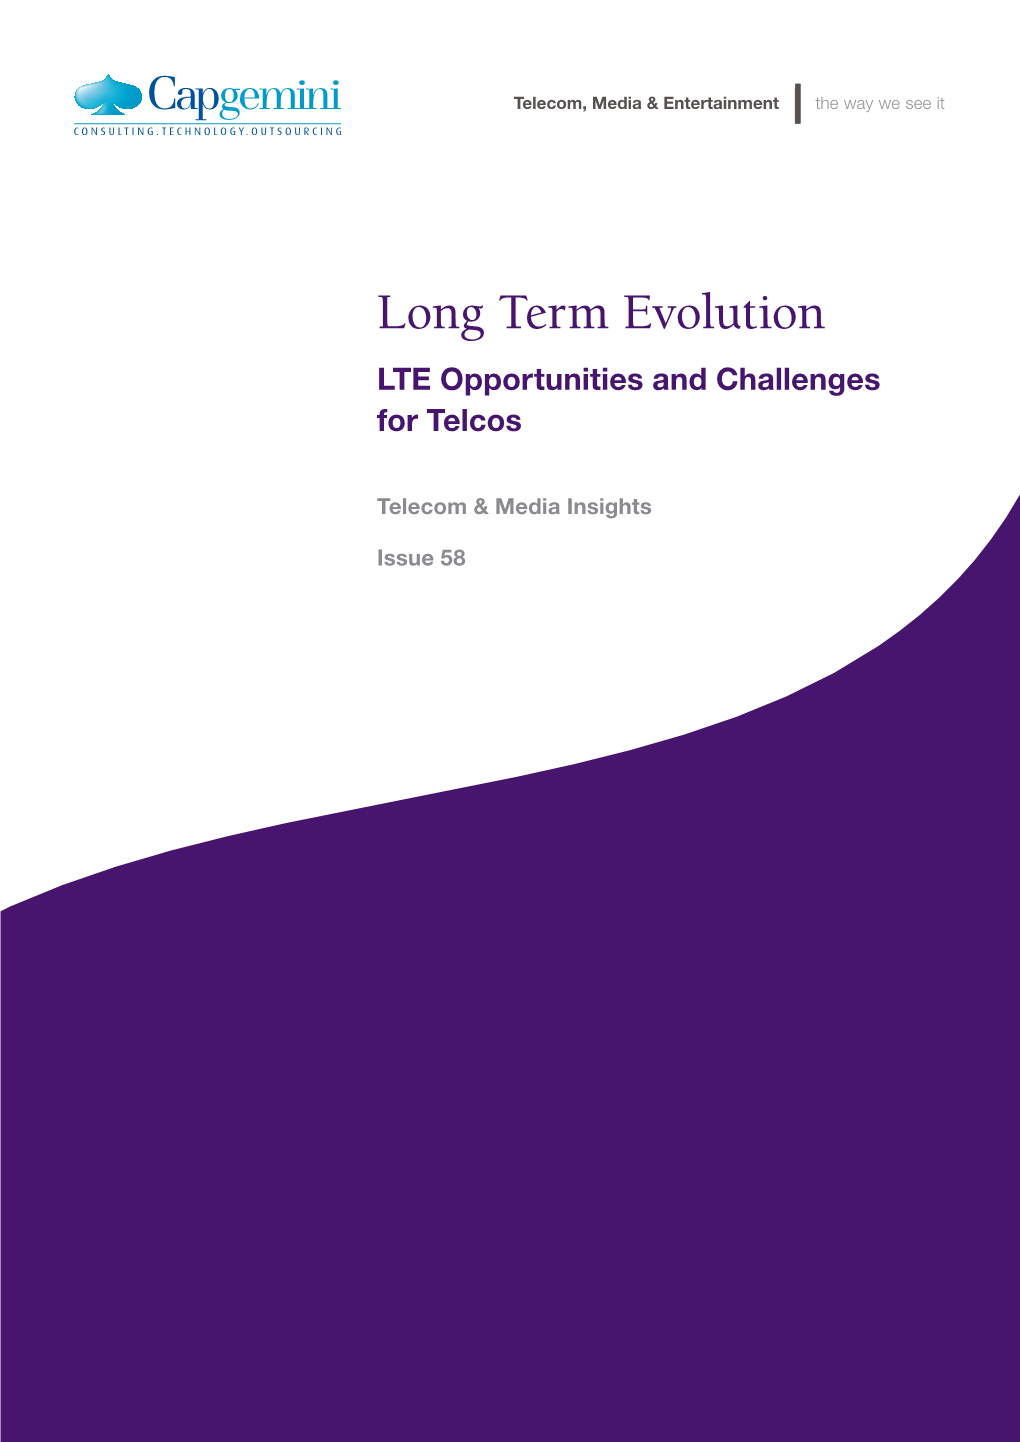 Long Term Evolution LTE Opportunities and Challenges for Telcos